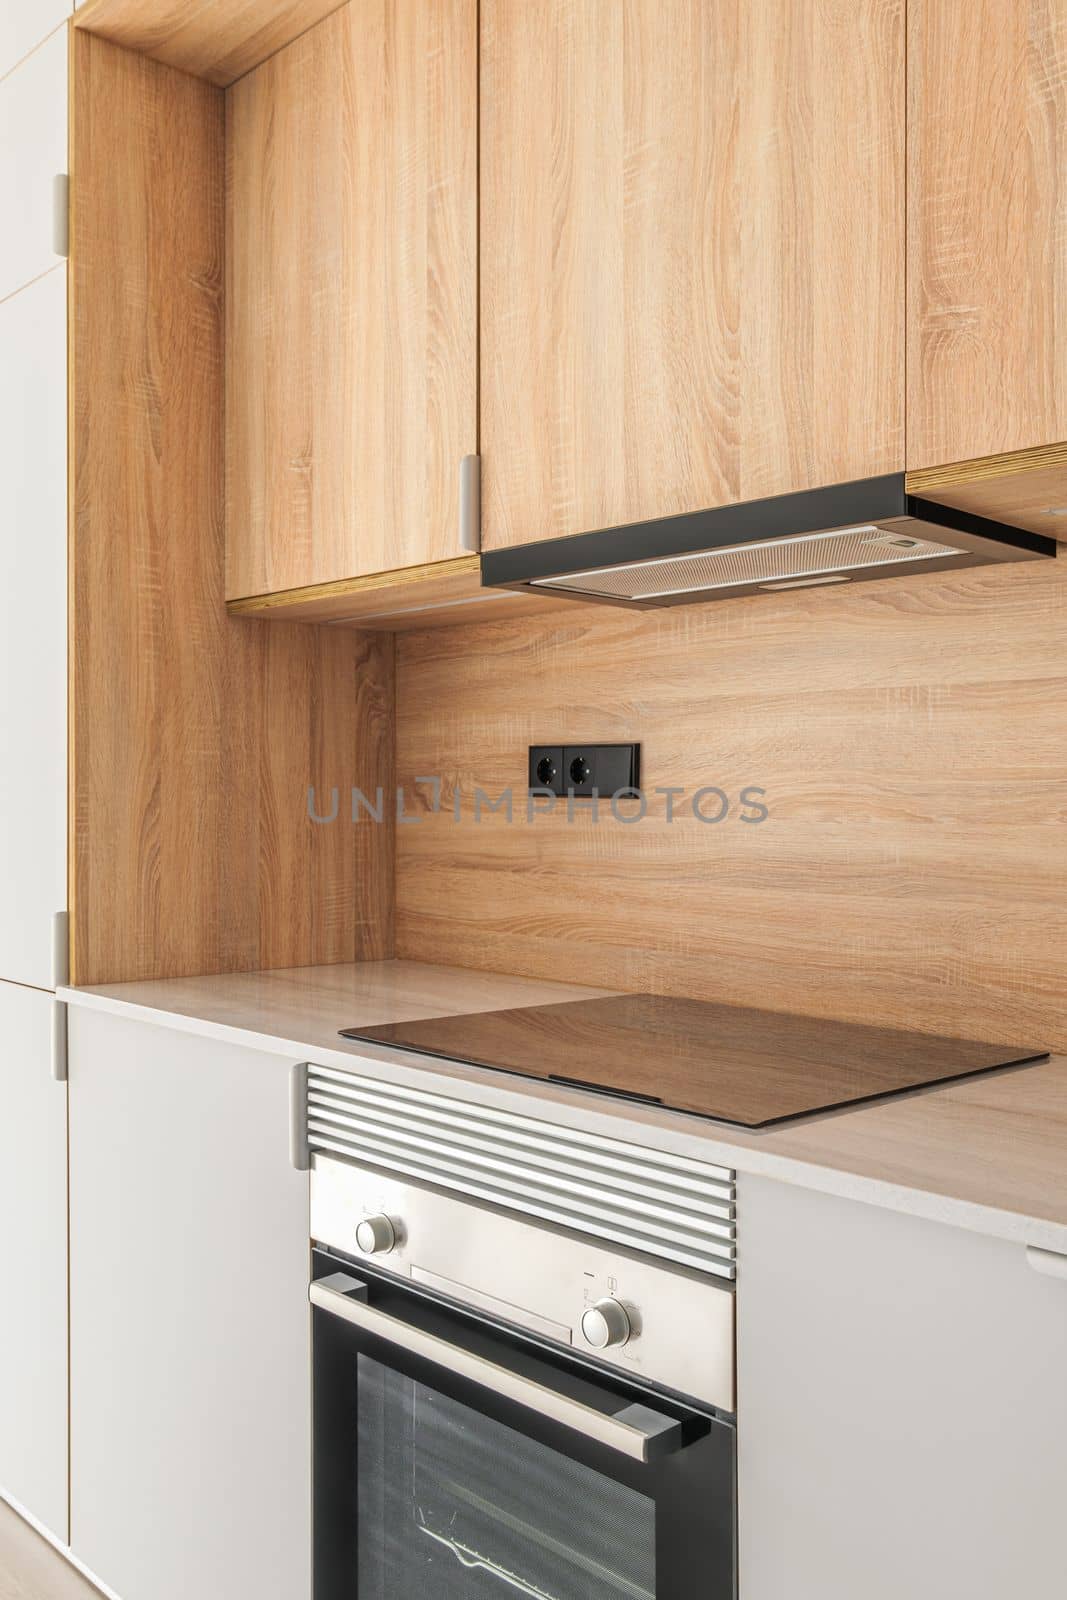 Closeup of piece of modular kitchen furniture made of wood. Modern cozy kitchen interior with appliances built into marble countertop. Hood hidden from view in cabinet above stove and oven. by apavlin